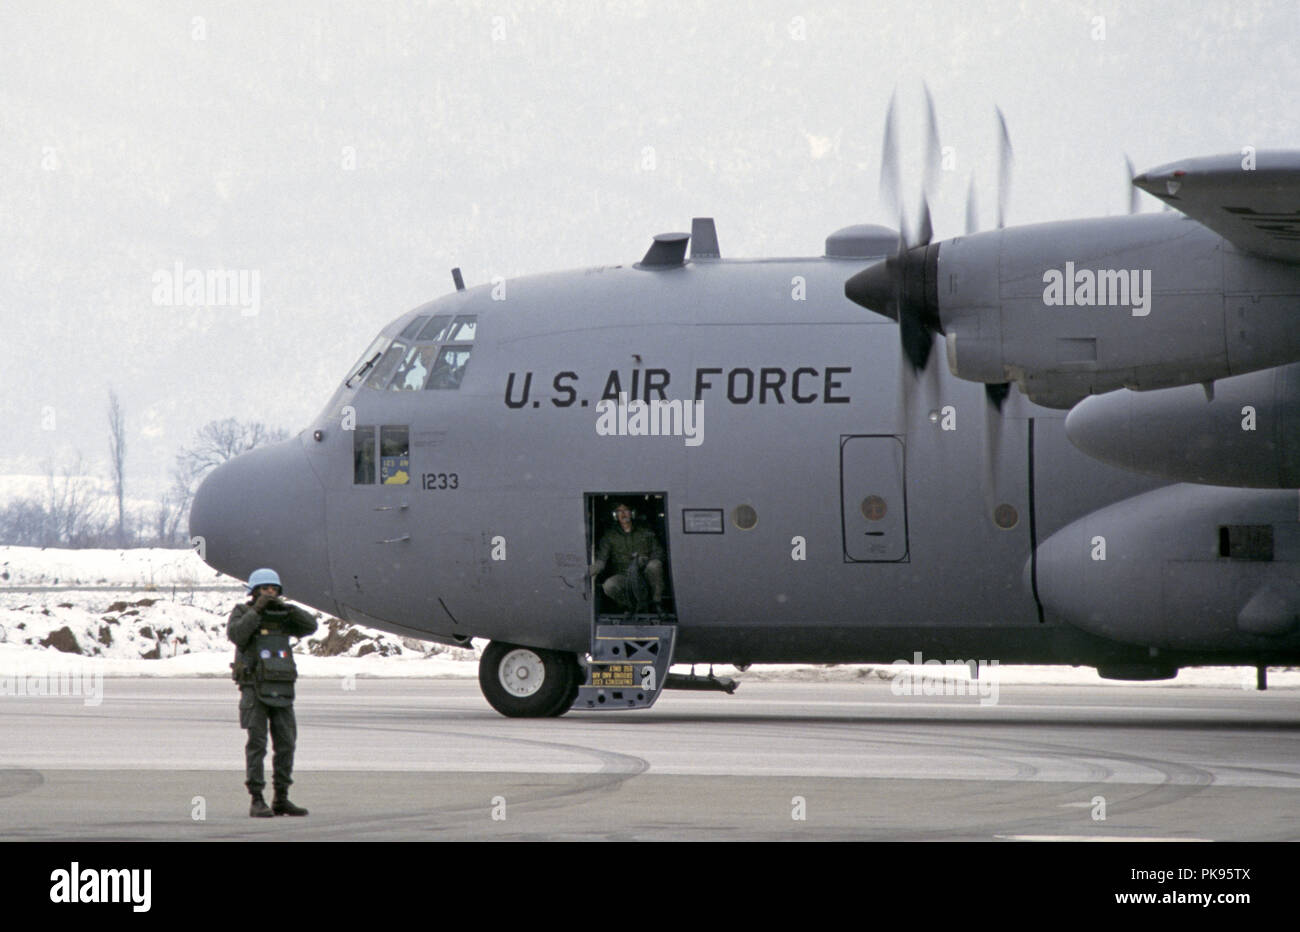 8th March 1993 During the Siege of Sarajevo: as snow falls, an American Lockheed C-130 Hercules transport jet of the Kentucky Air Guard is on the tarmac at Sarajevo Airport. A French UN soldier stands next to it, waiting to give the all clear for take-off. Stock Photo